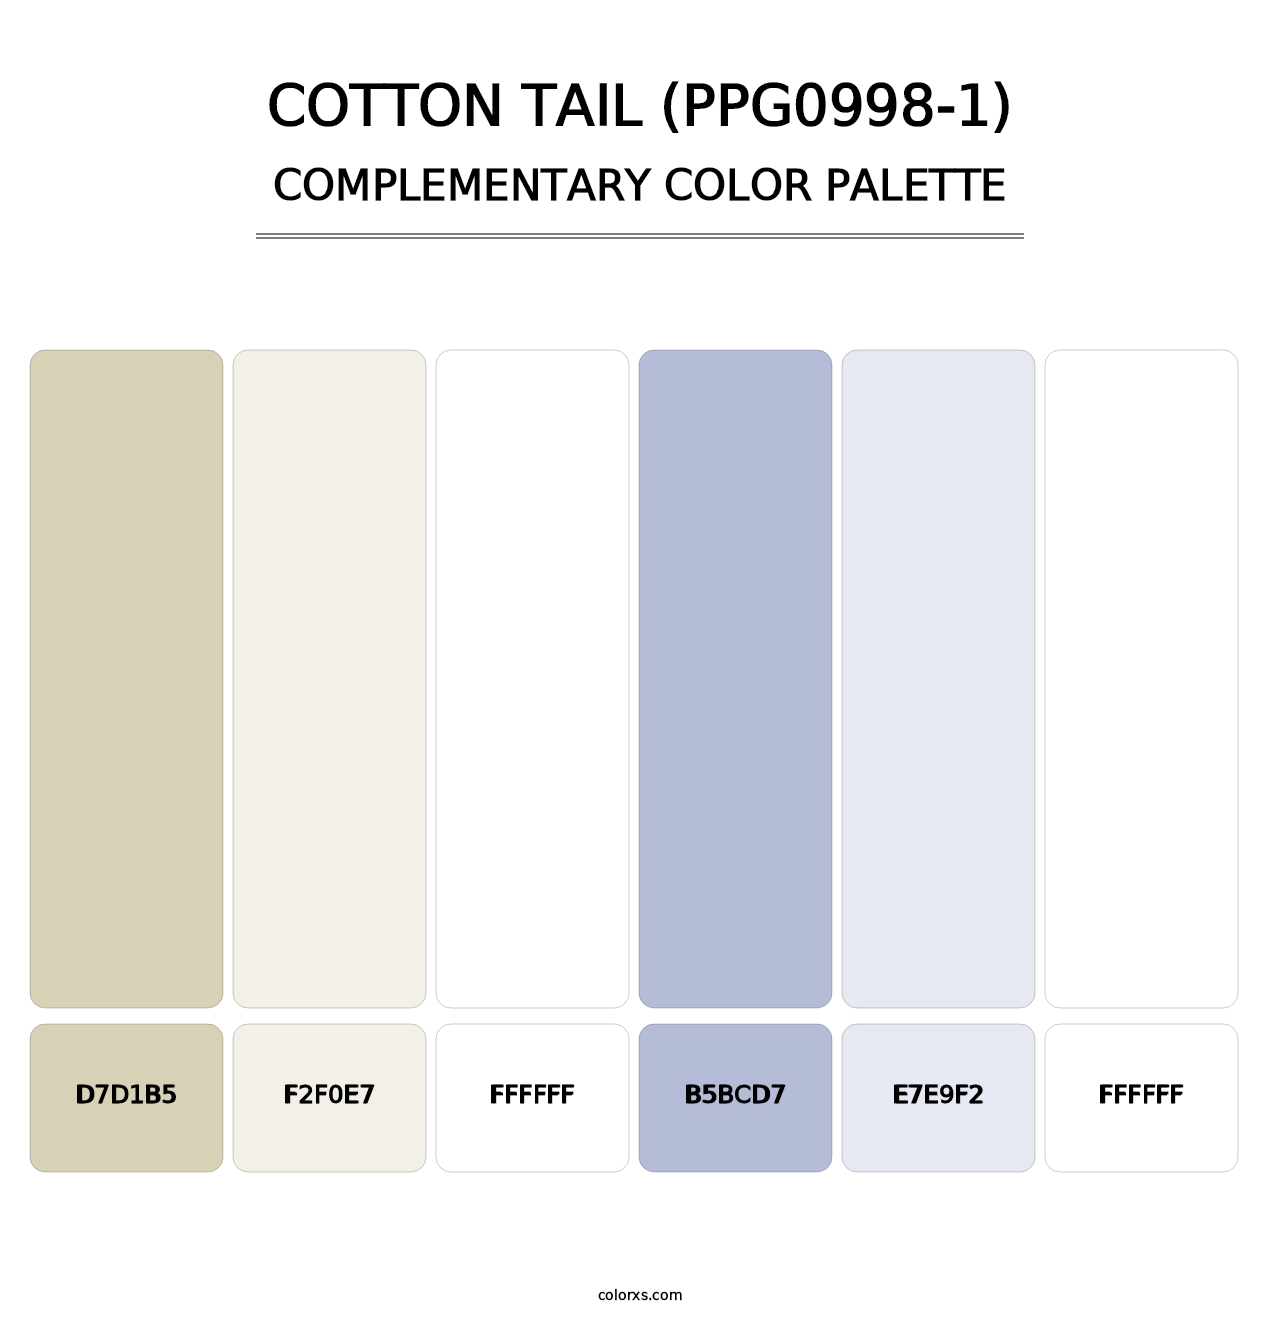 Cotton Tail (PPG0998-1) - Complementary Color Palette